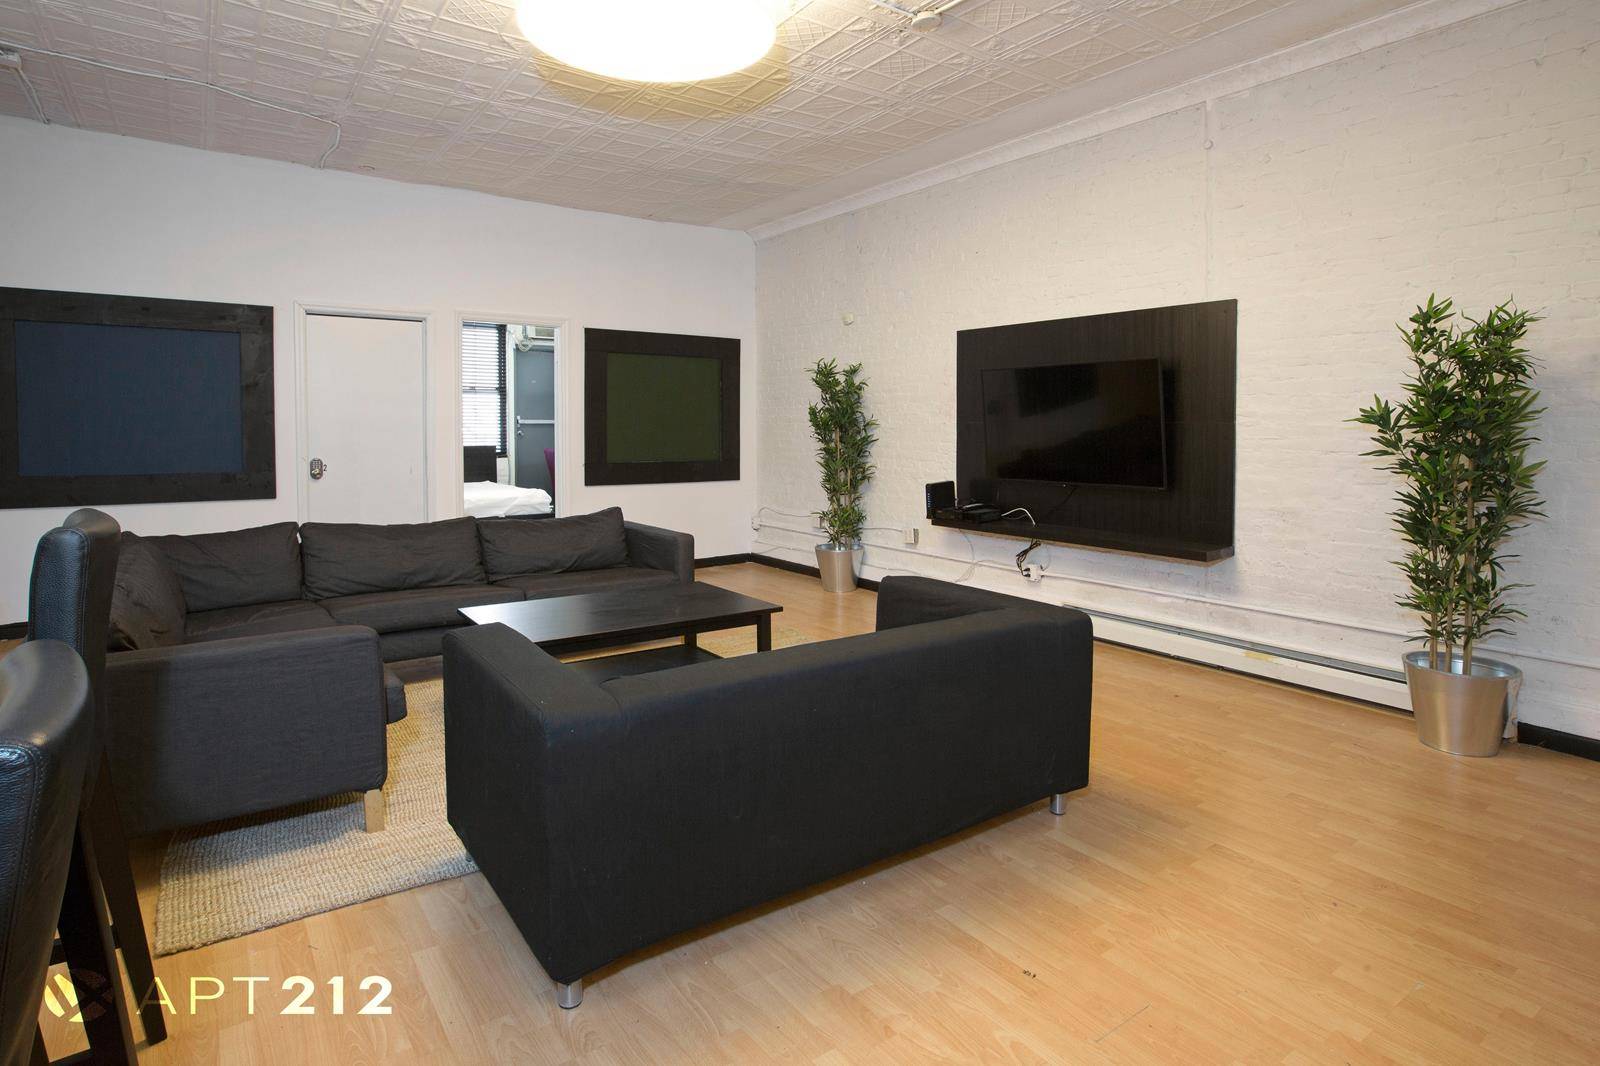 Monthly price is based on a 12 month leaseCan be rented fully furnished as shown in the pictures for an additional 100 monthSpacious Studio Apartment.